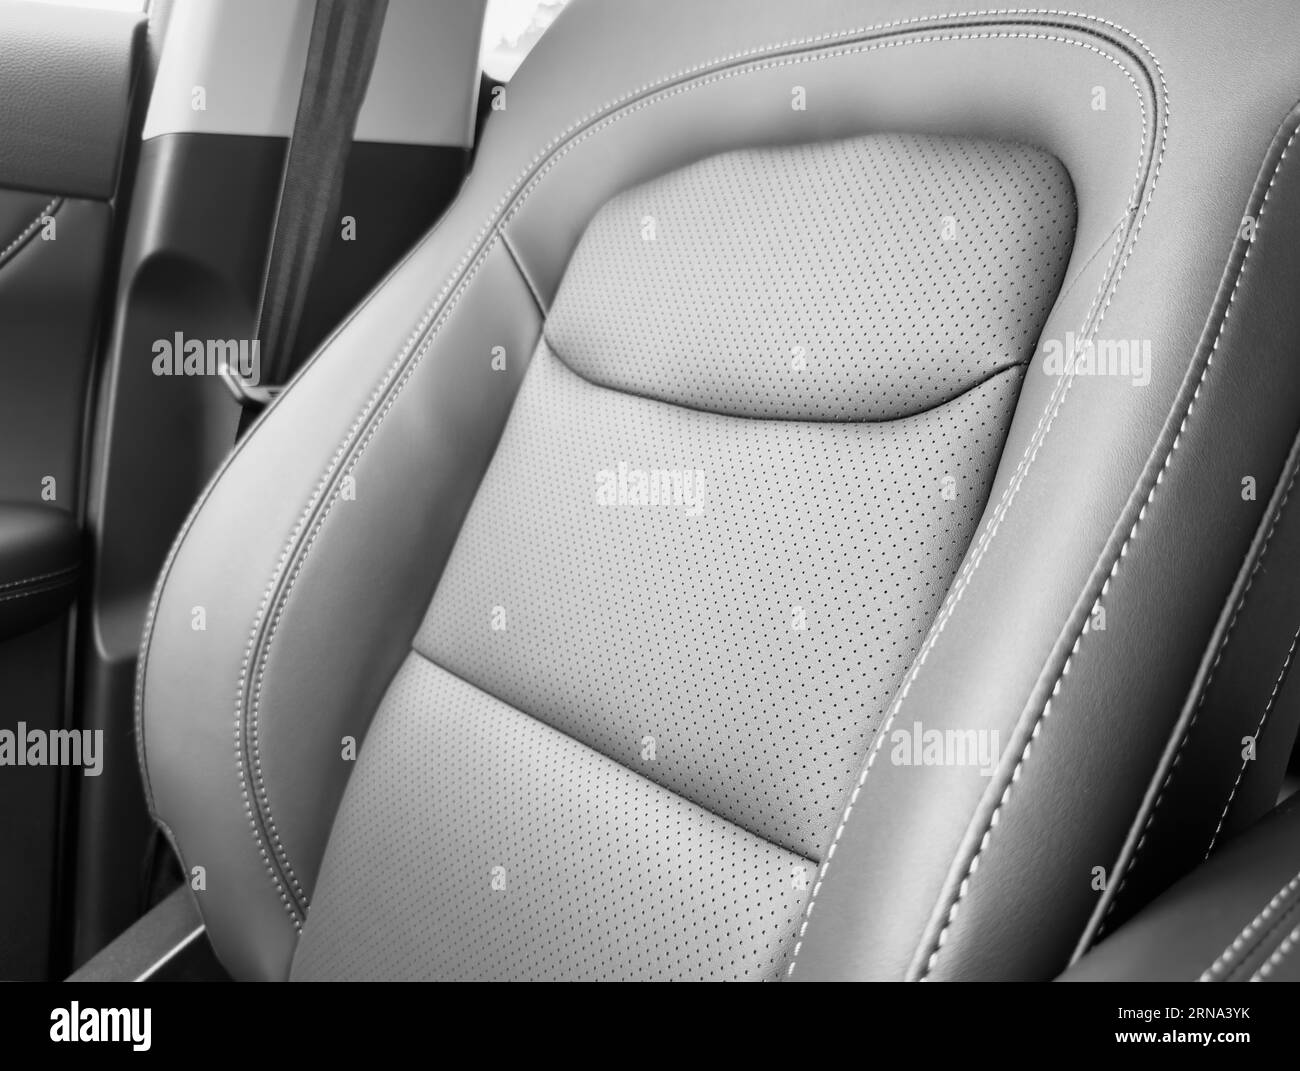 Black luxury modern car Interior. Detail of modern car interior. Part of black leather seats with red stitching in expensive car Stock Photo